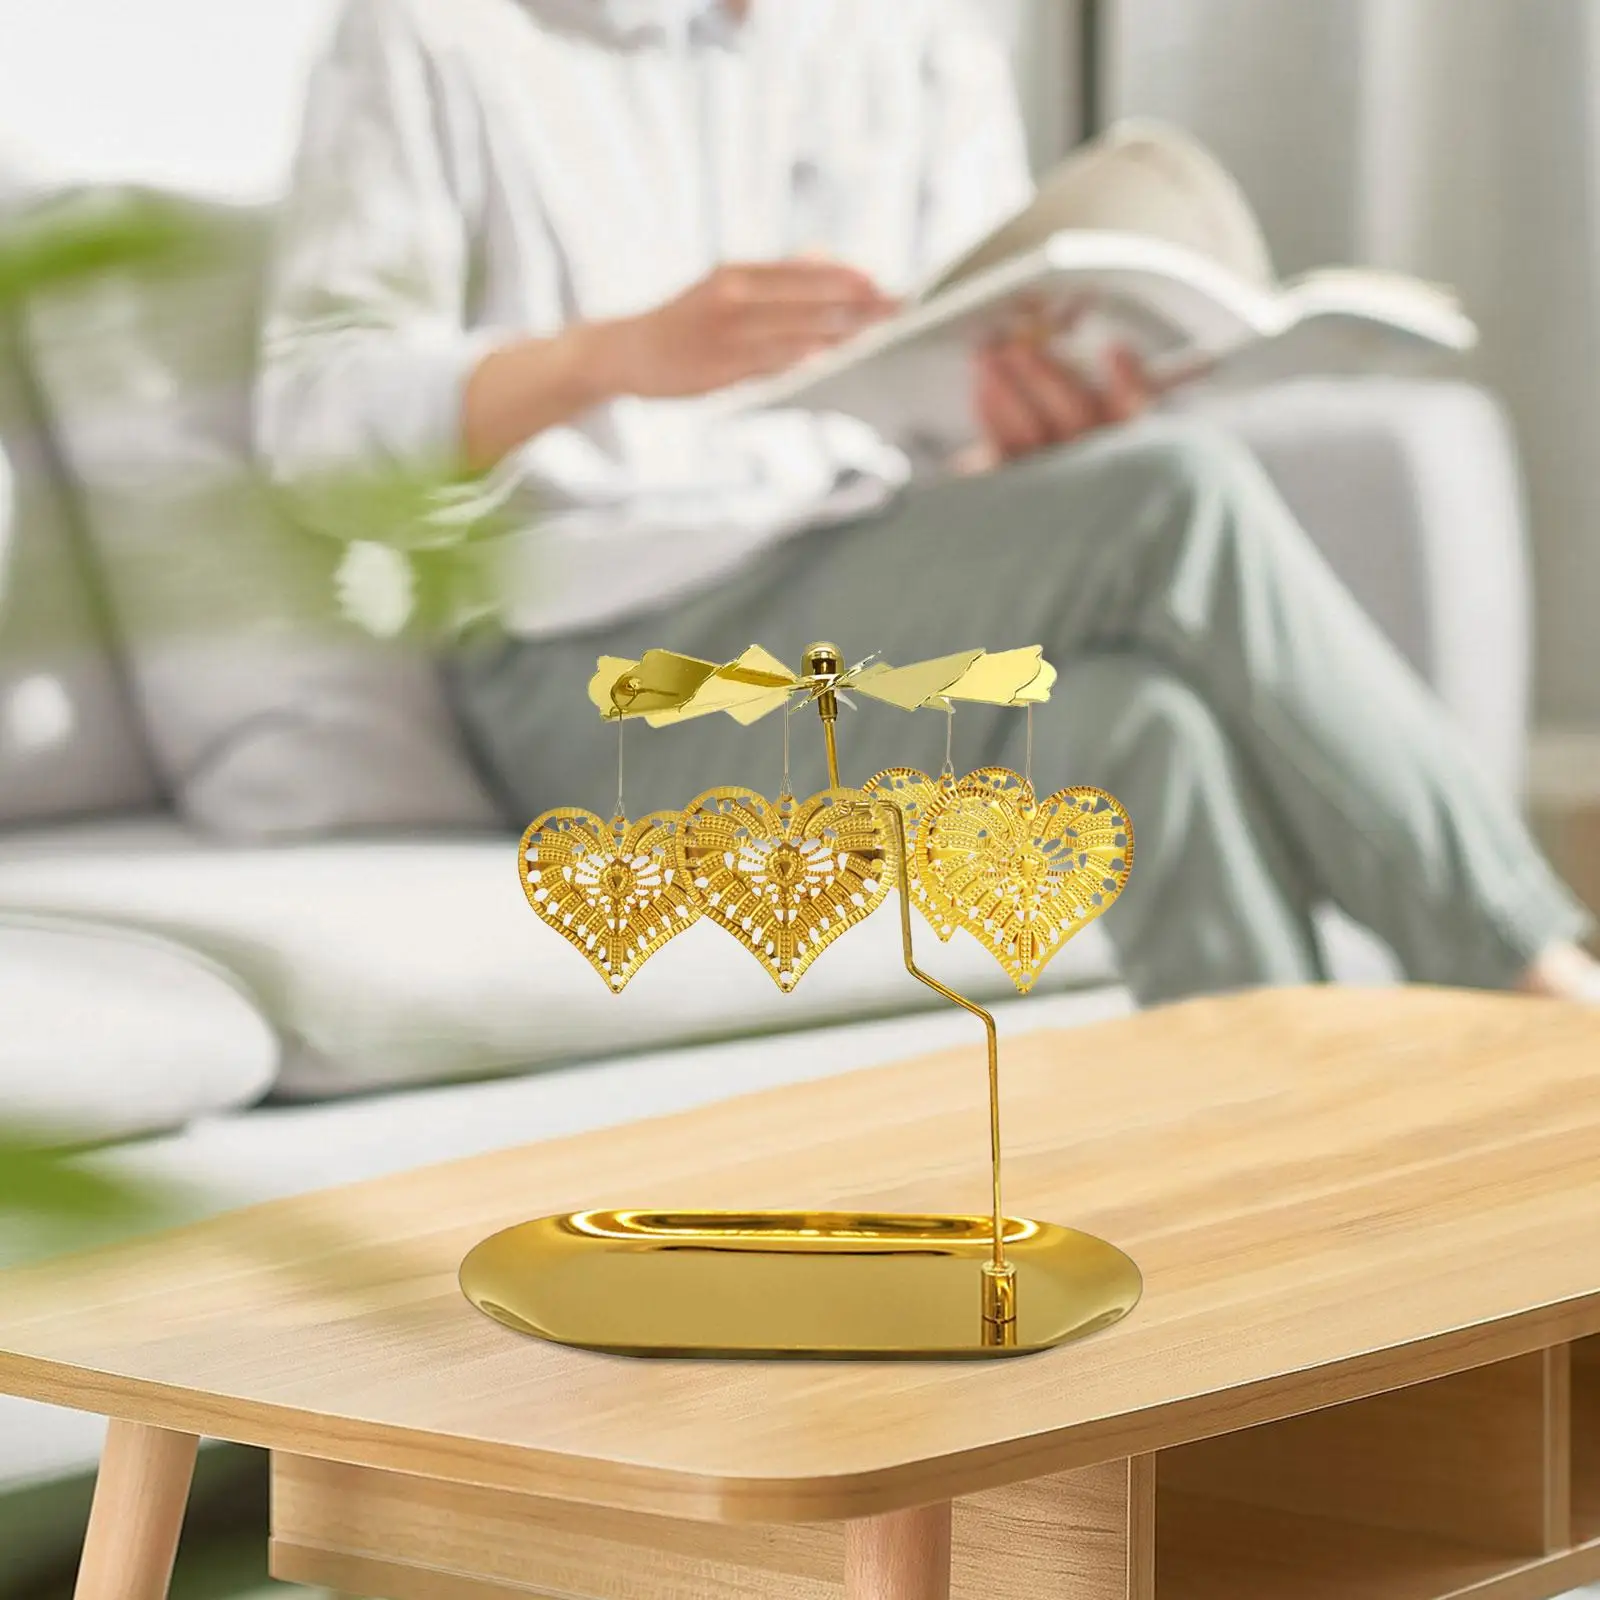 Rotating Candle Holder Decorative Table Centerpiece Candle Holder for Jar